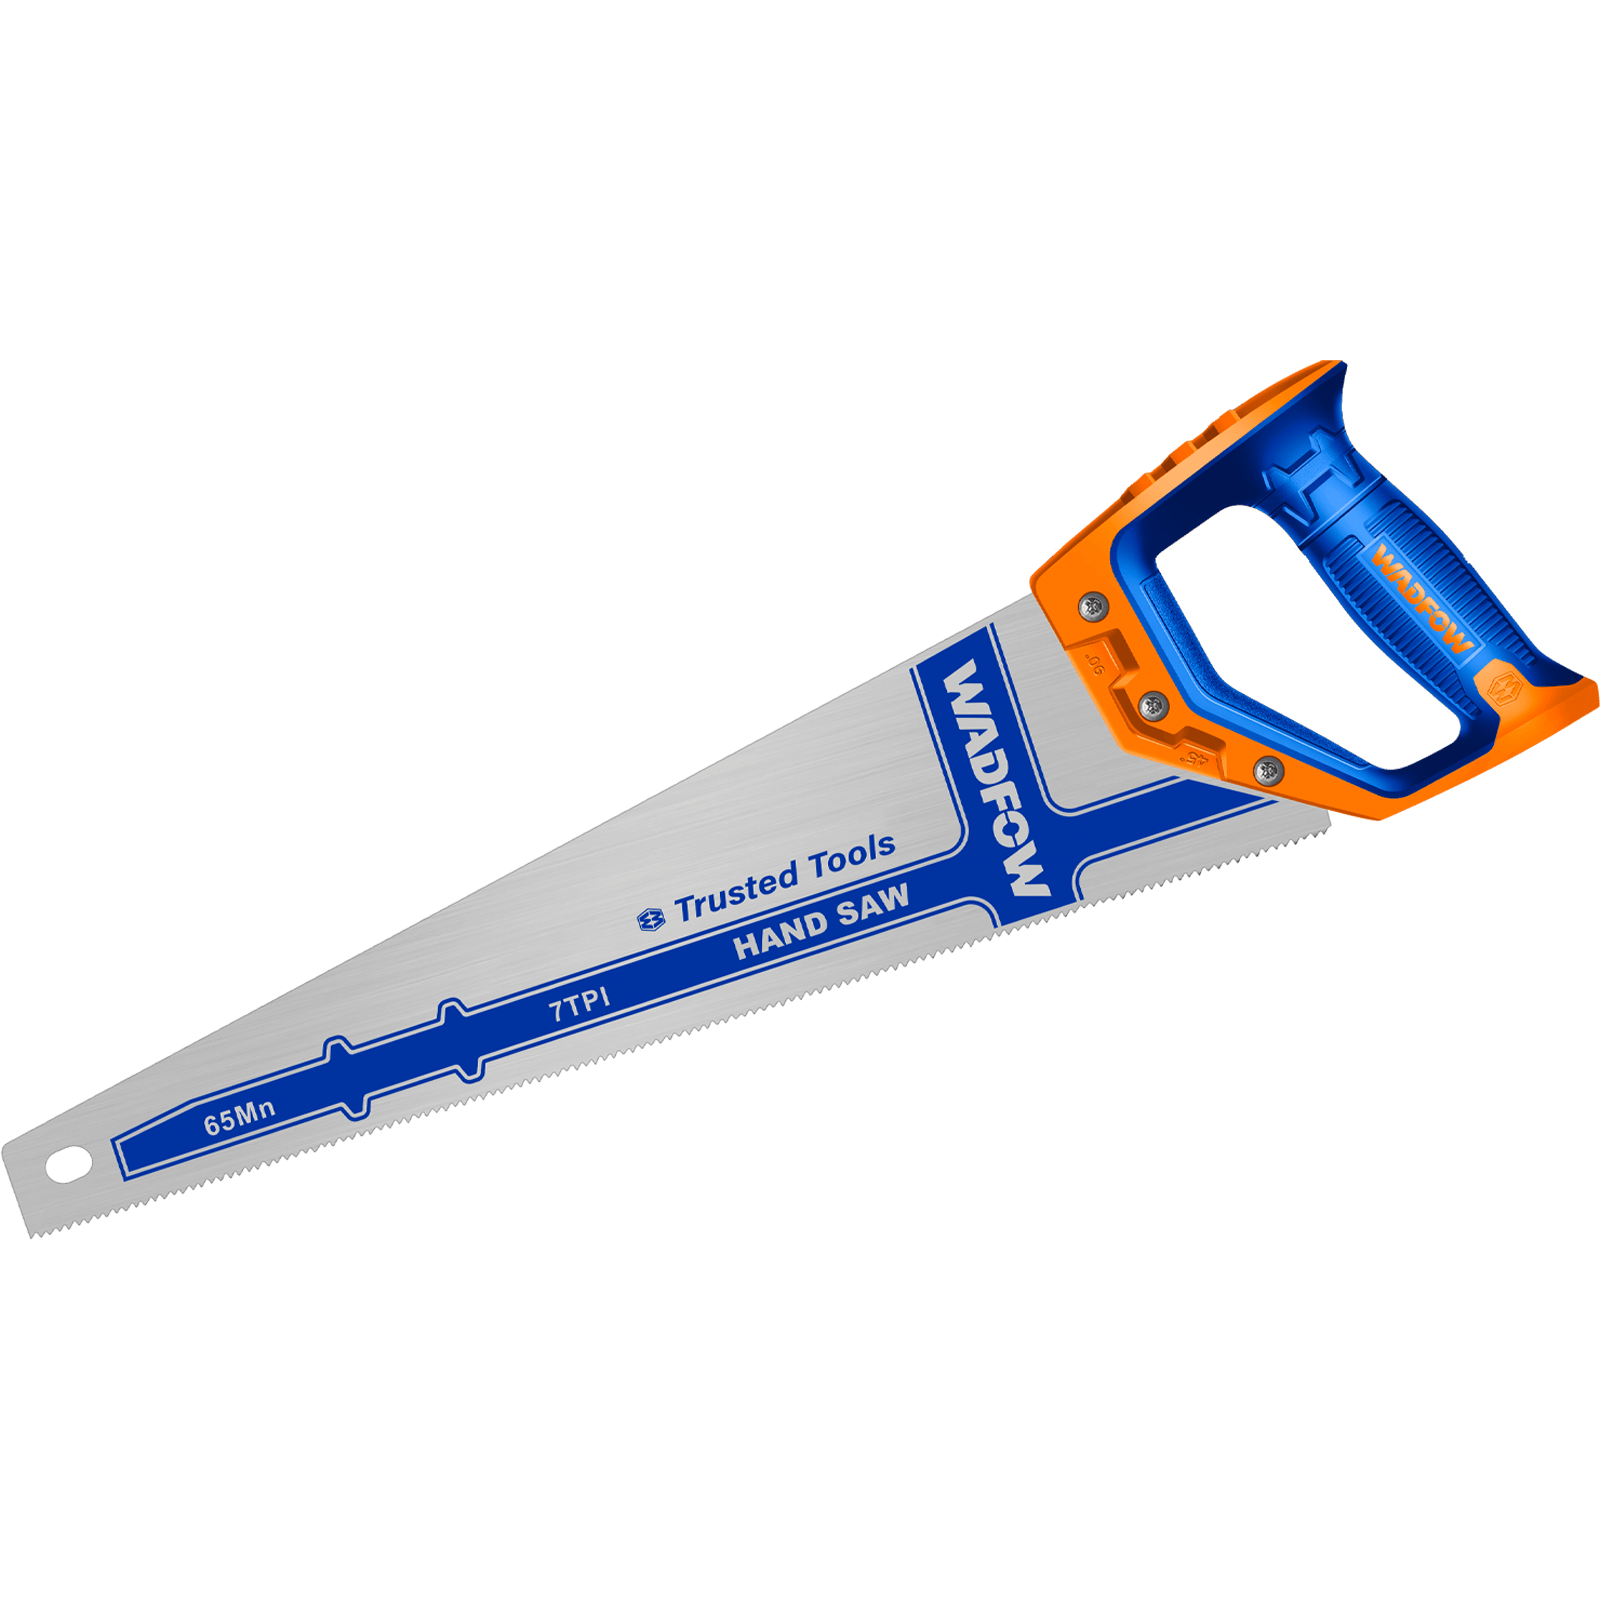 Ingco Hand Saw 7TPI With Teeth Protector - HHAS15400 & HHAS15450 - Buy Online in Accra, Ghana at Supply Master Hand Saws & Cutting Tools Buy Tools hardware Building materials